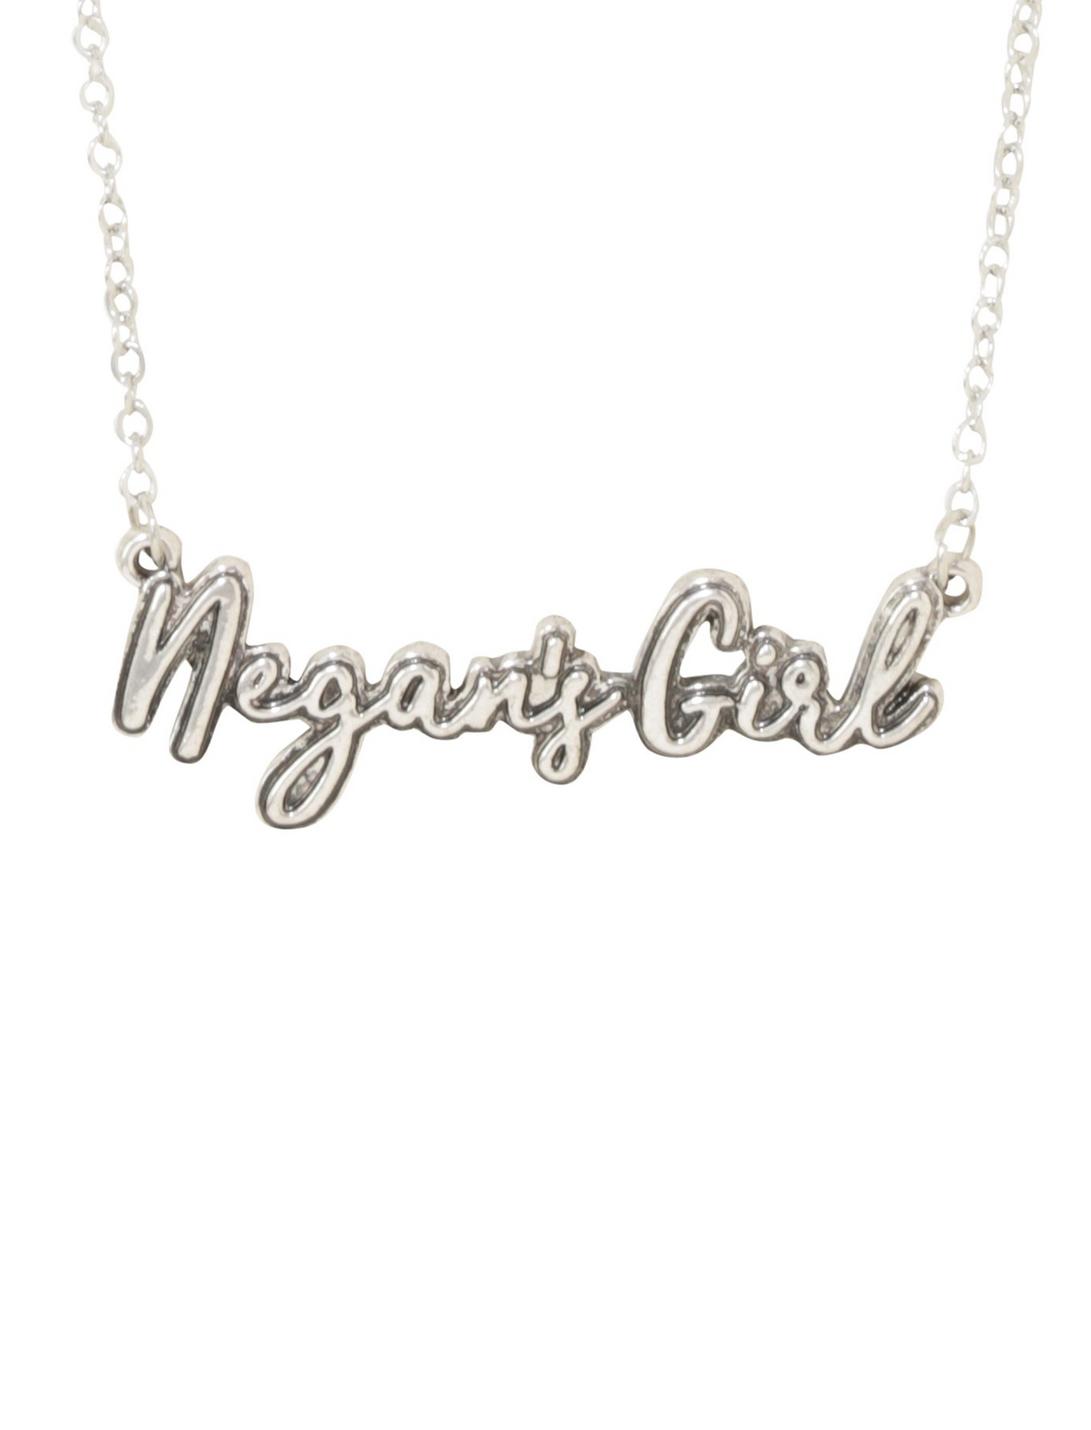 The Walking Dead Negan's Girl Name Plate Necklace, , hi-res